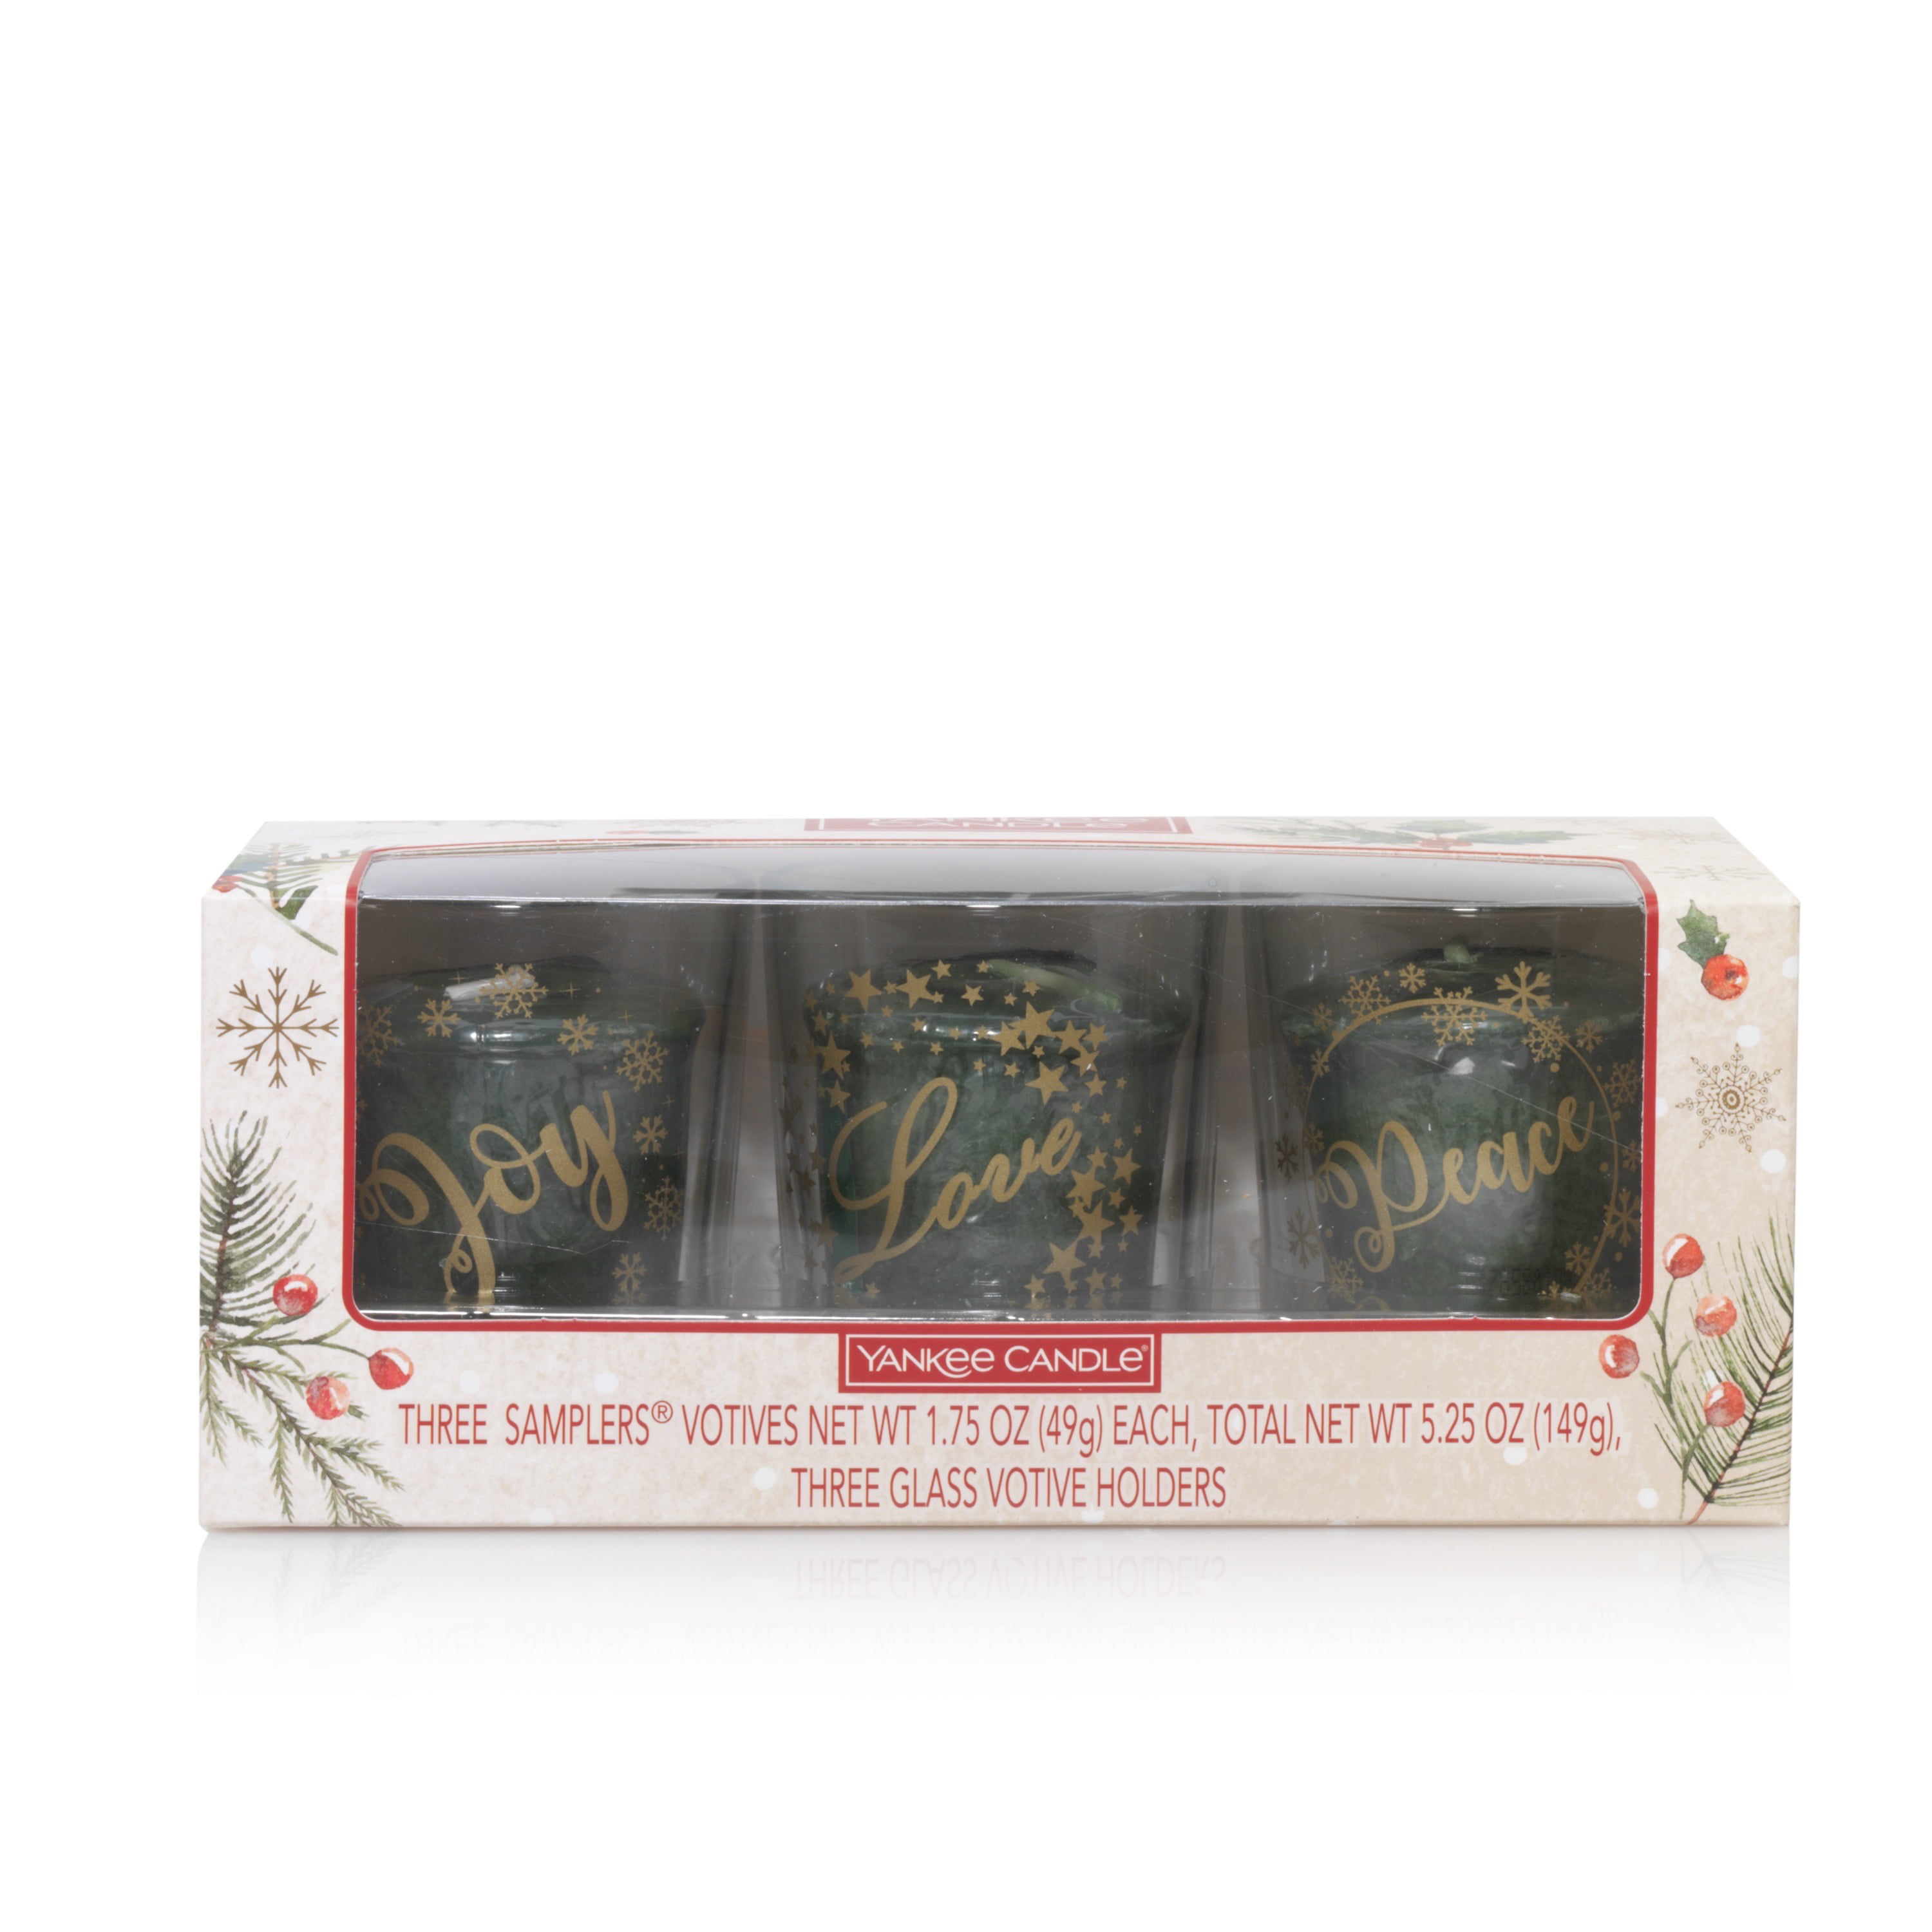 New Yankee Candle Discontinued D3 FLICKER STARS VOTIVE HOLDER SET OF 3 